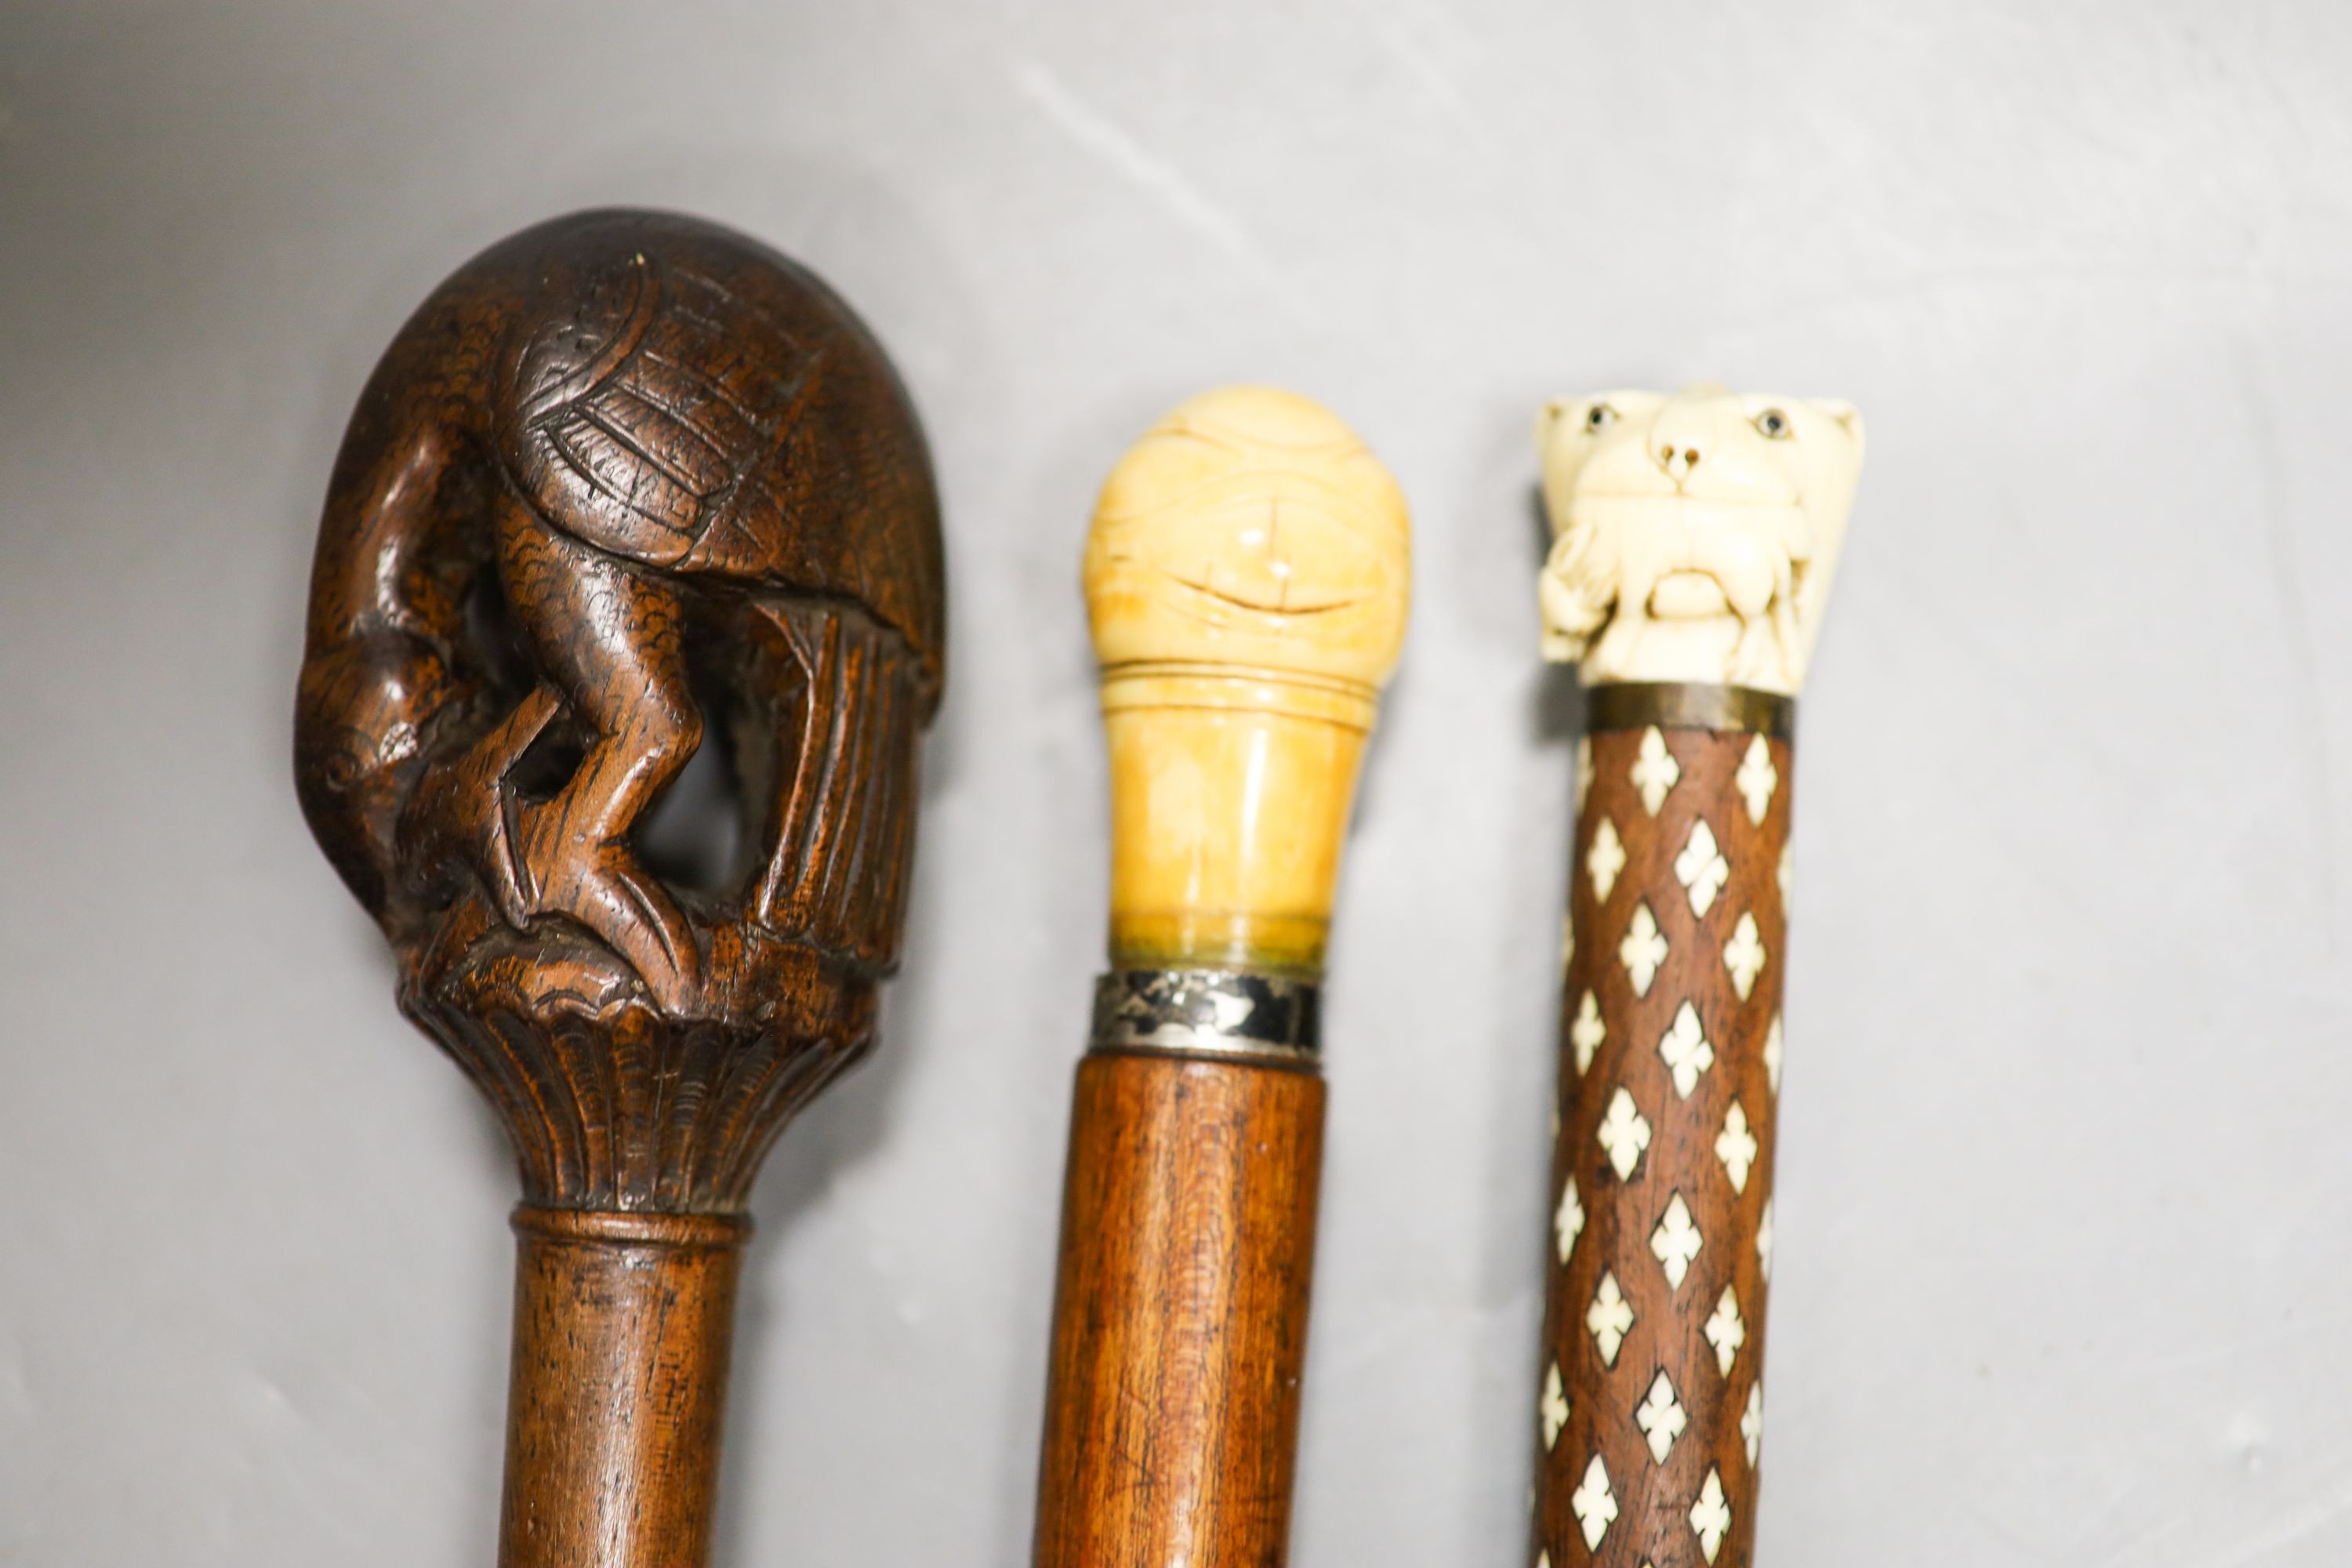 Three various walking canesIncluding two carved Ivory topped walking canes, one the cane in laid